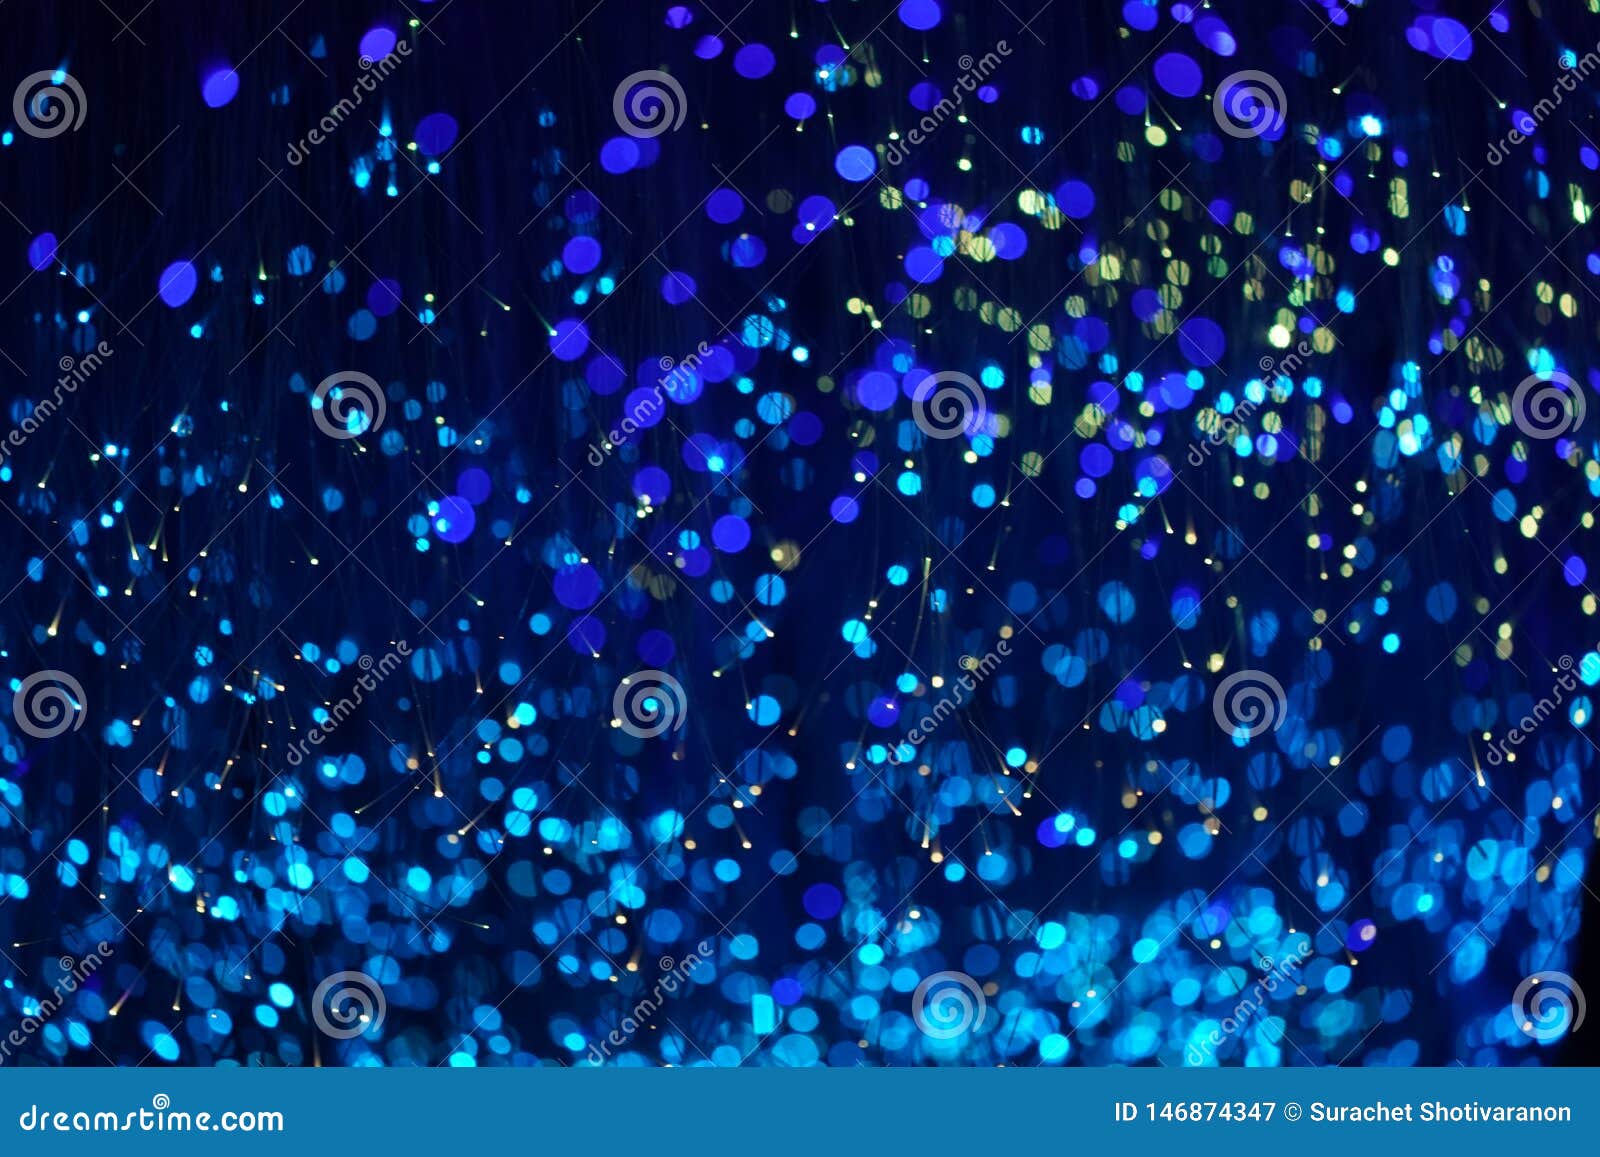 Fantastic Blurry and Bokeh Dark Blue Theme Background in the Mystry Cave  Stock Image - Image of blurry, disco: 146874347